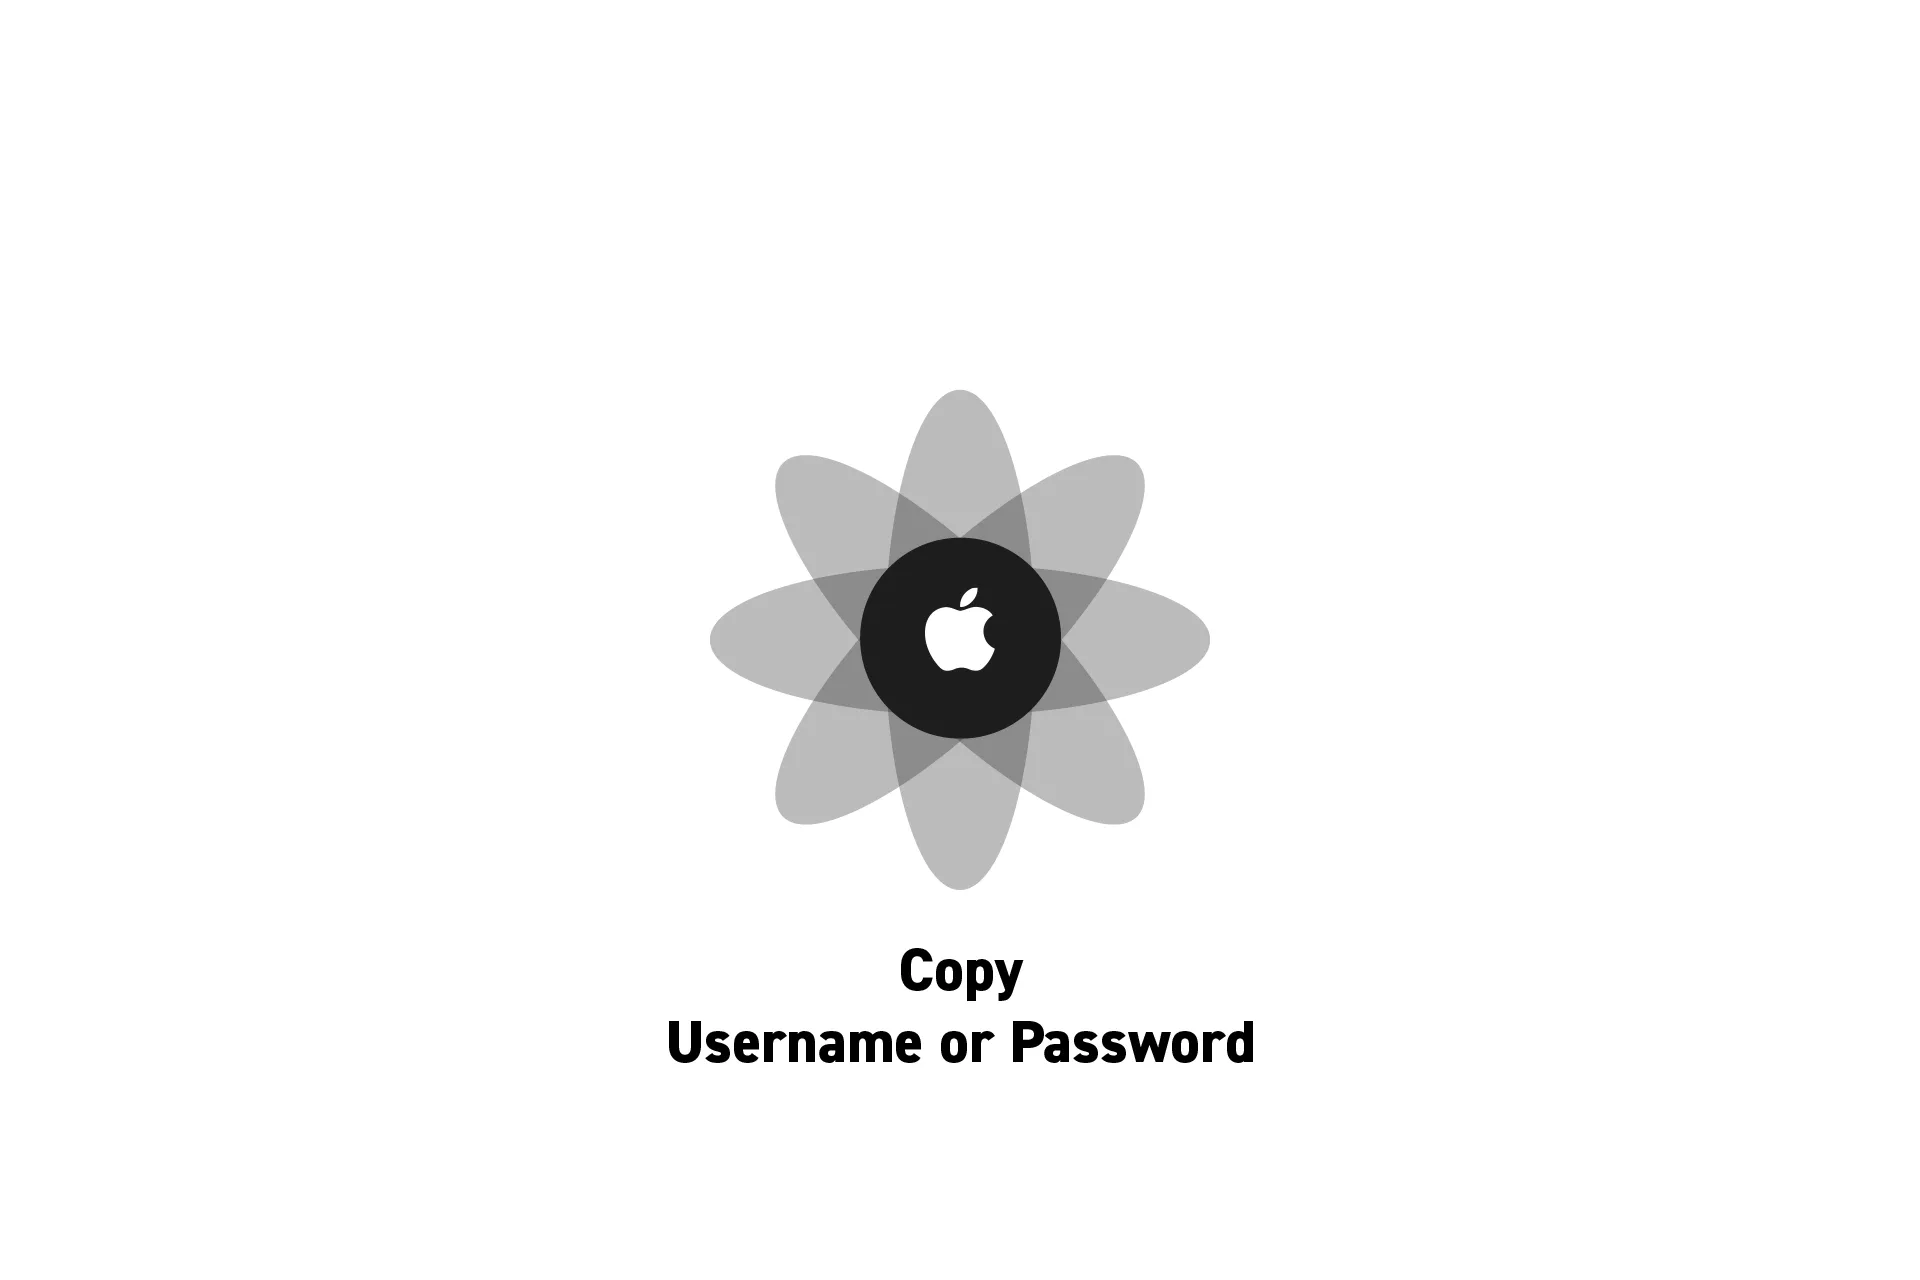 A flower that represents Apple with the text "Copy Username or Password" beneath it.